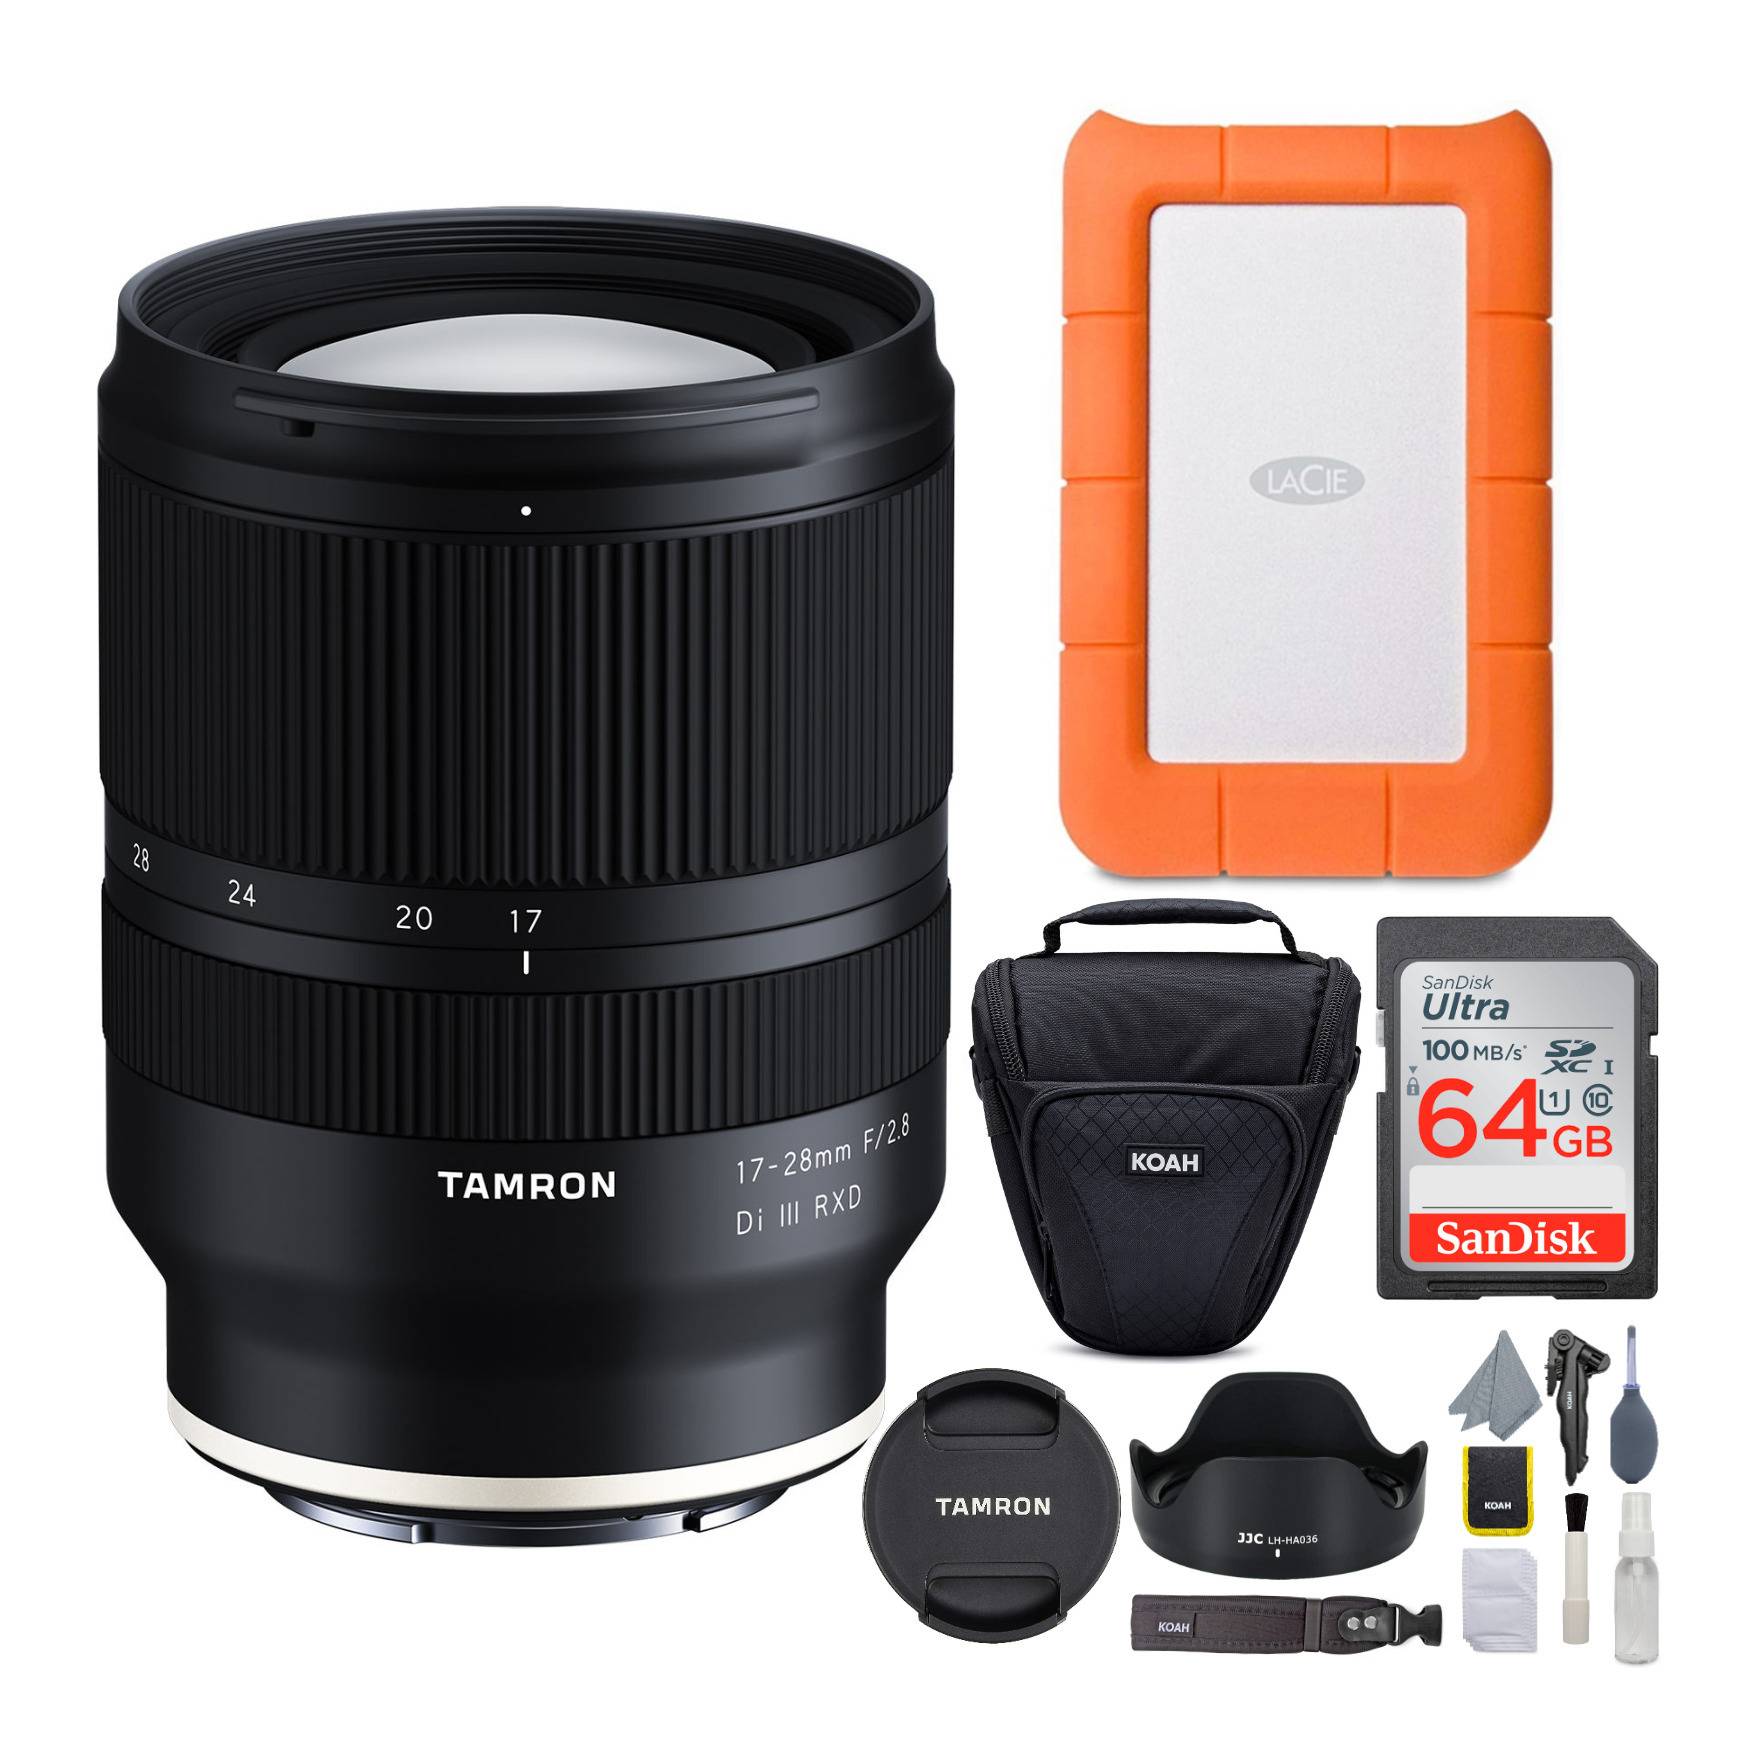 Tamron Di III RXD 17-28mm f/2.8 Lens Bundle with LaCie Hard Drive and Accessory